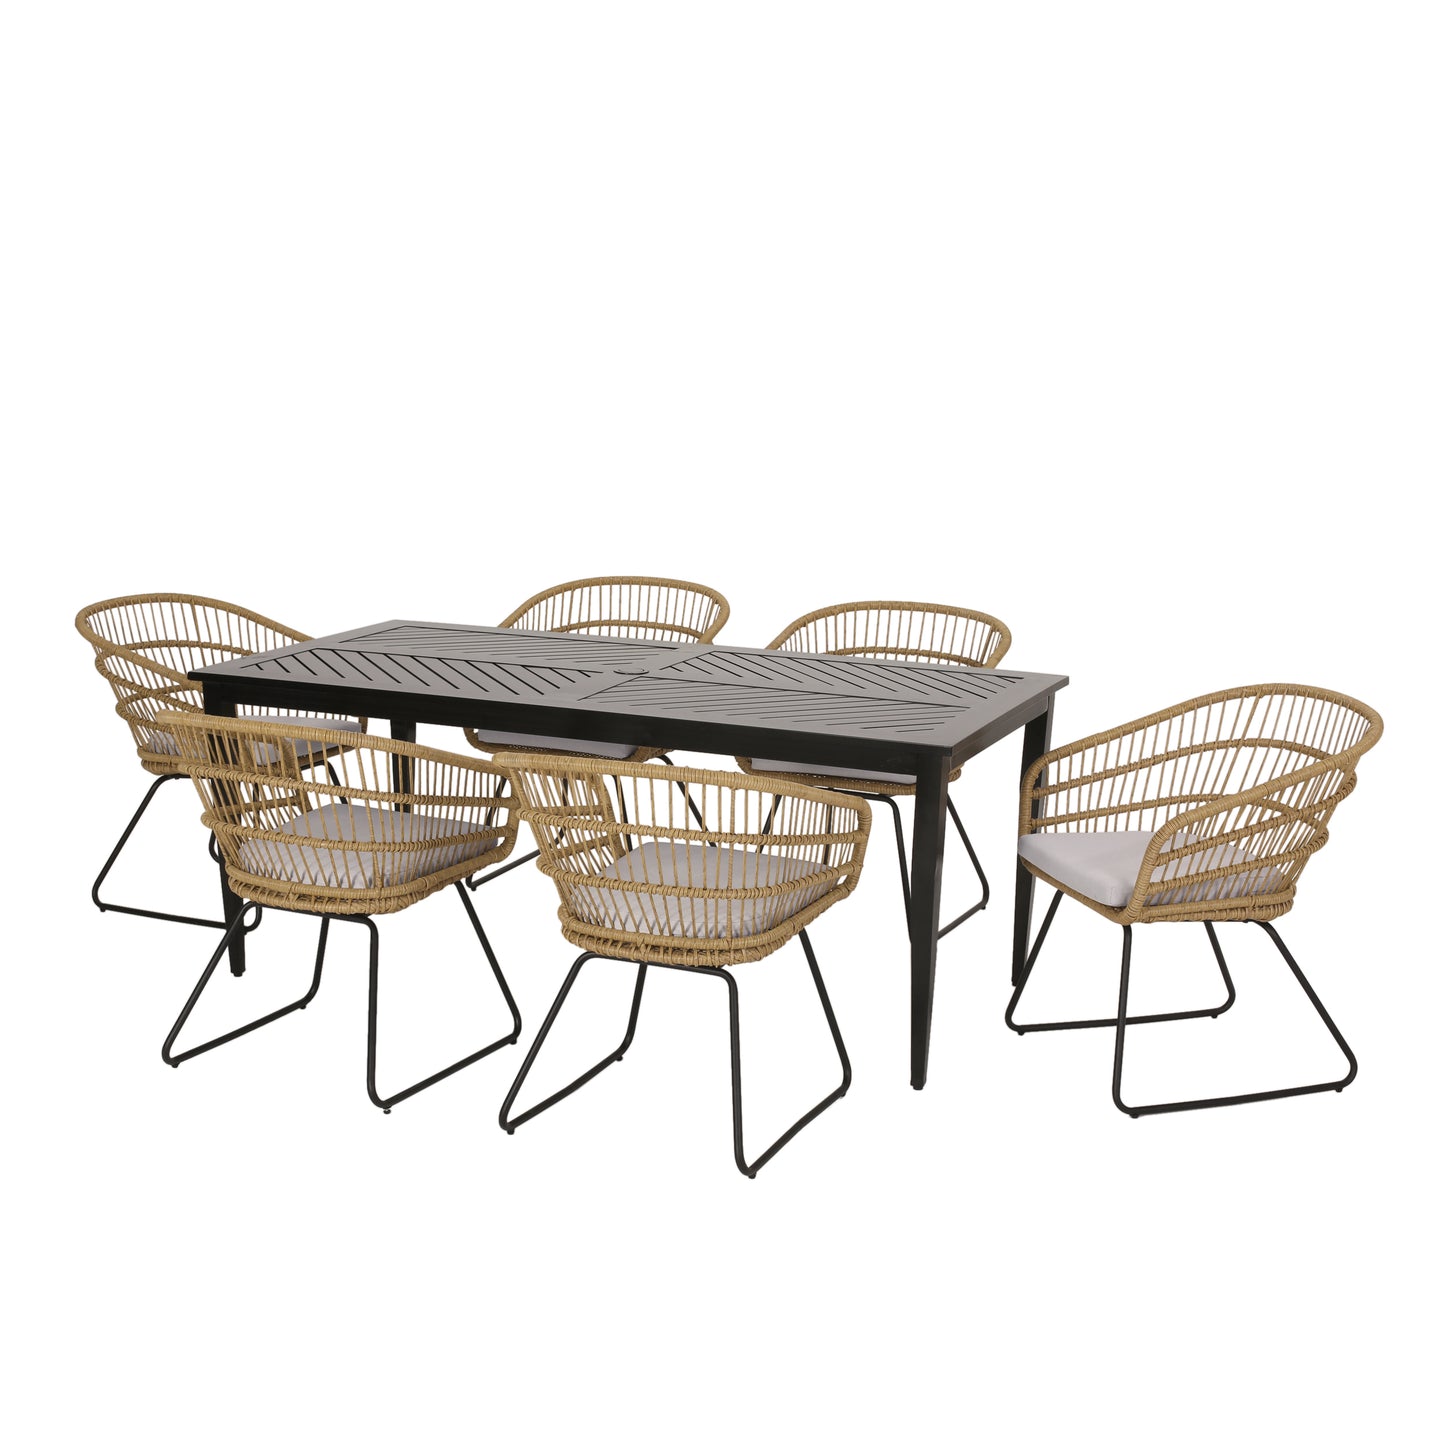 Bernay Outdoor Wicker and Aluminum 7 Piece Dining Set with Cushion, Light Brown, Beige, and Black